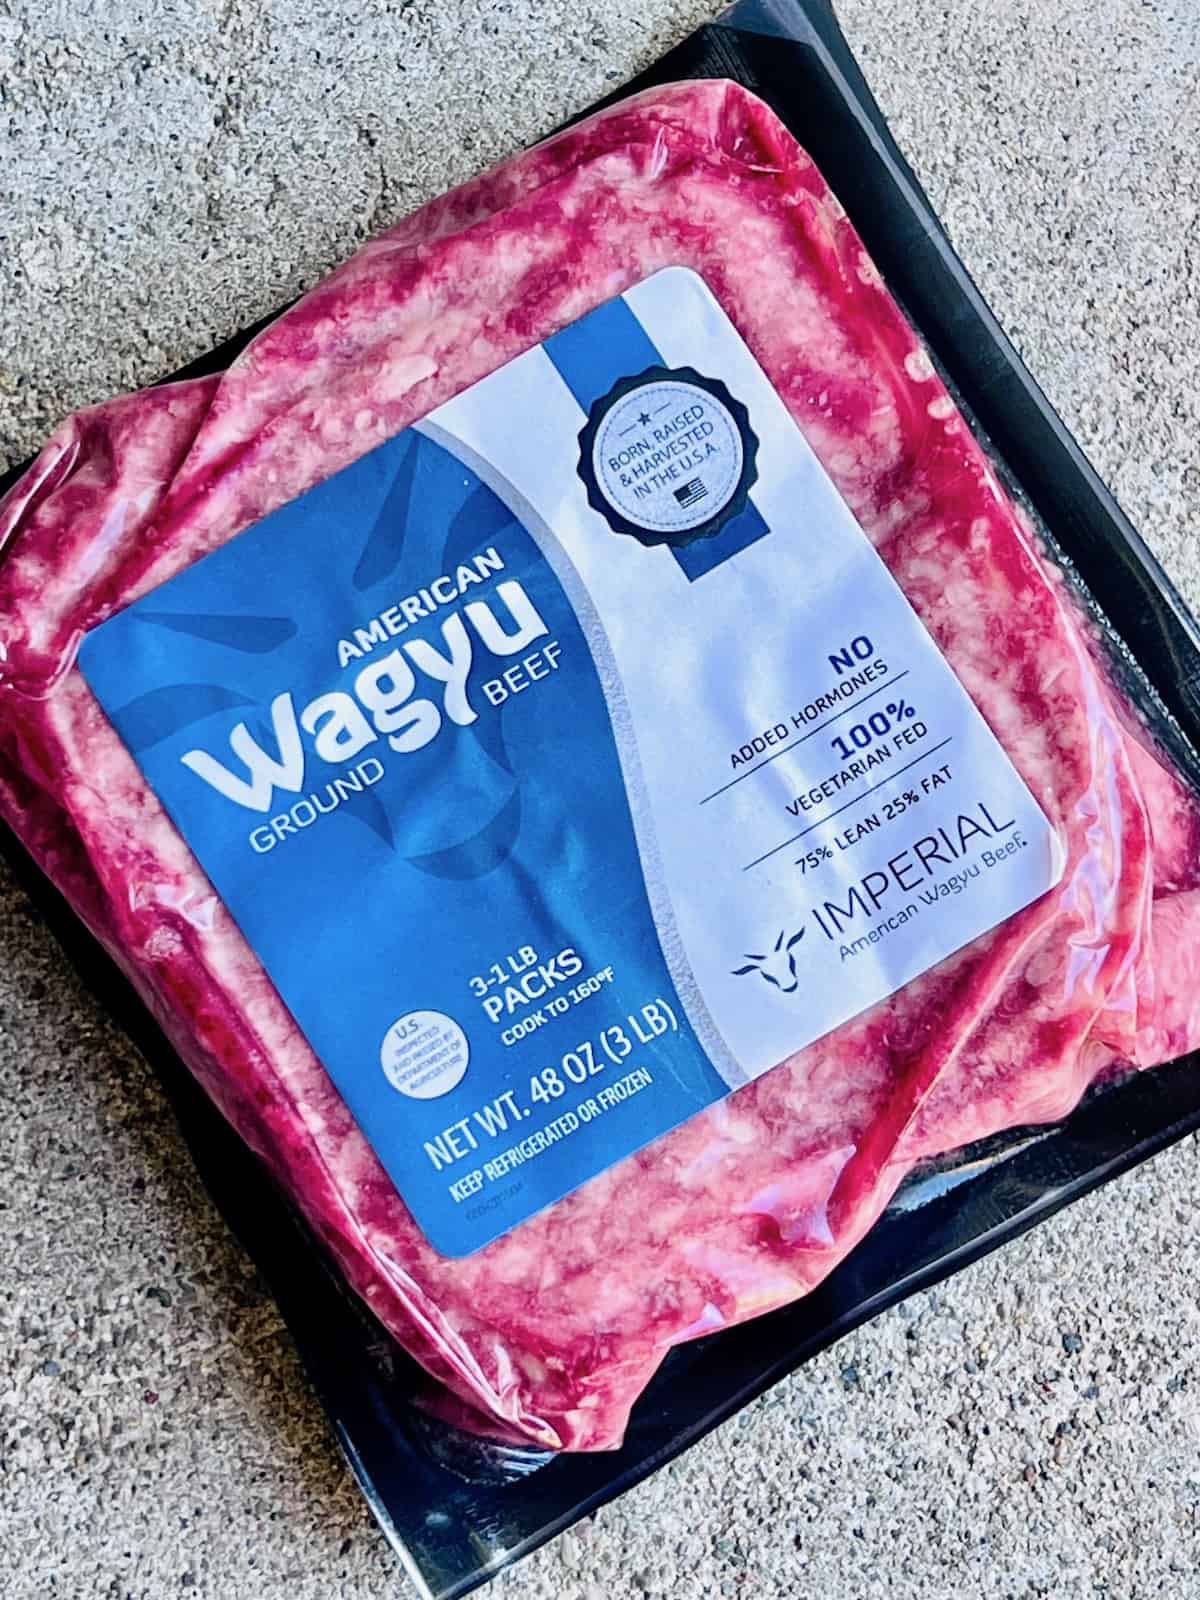 A package of American Wagyu ground beef bought at Costco.